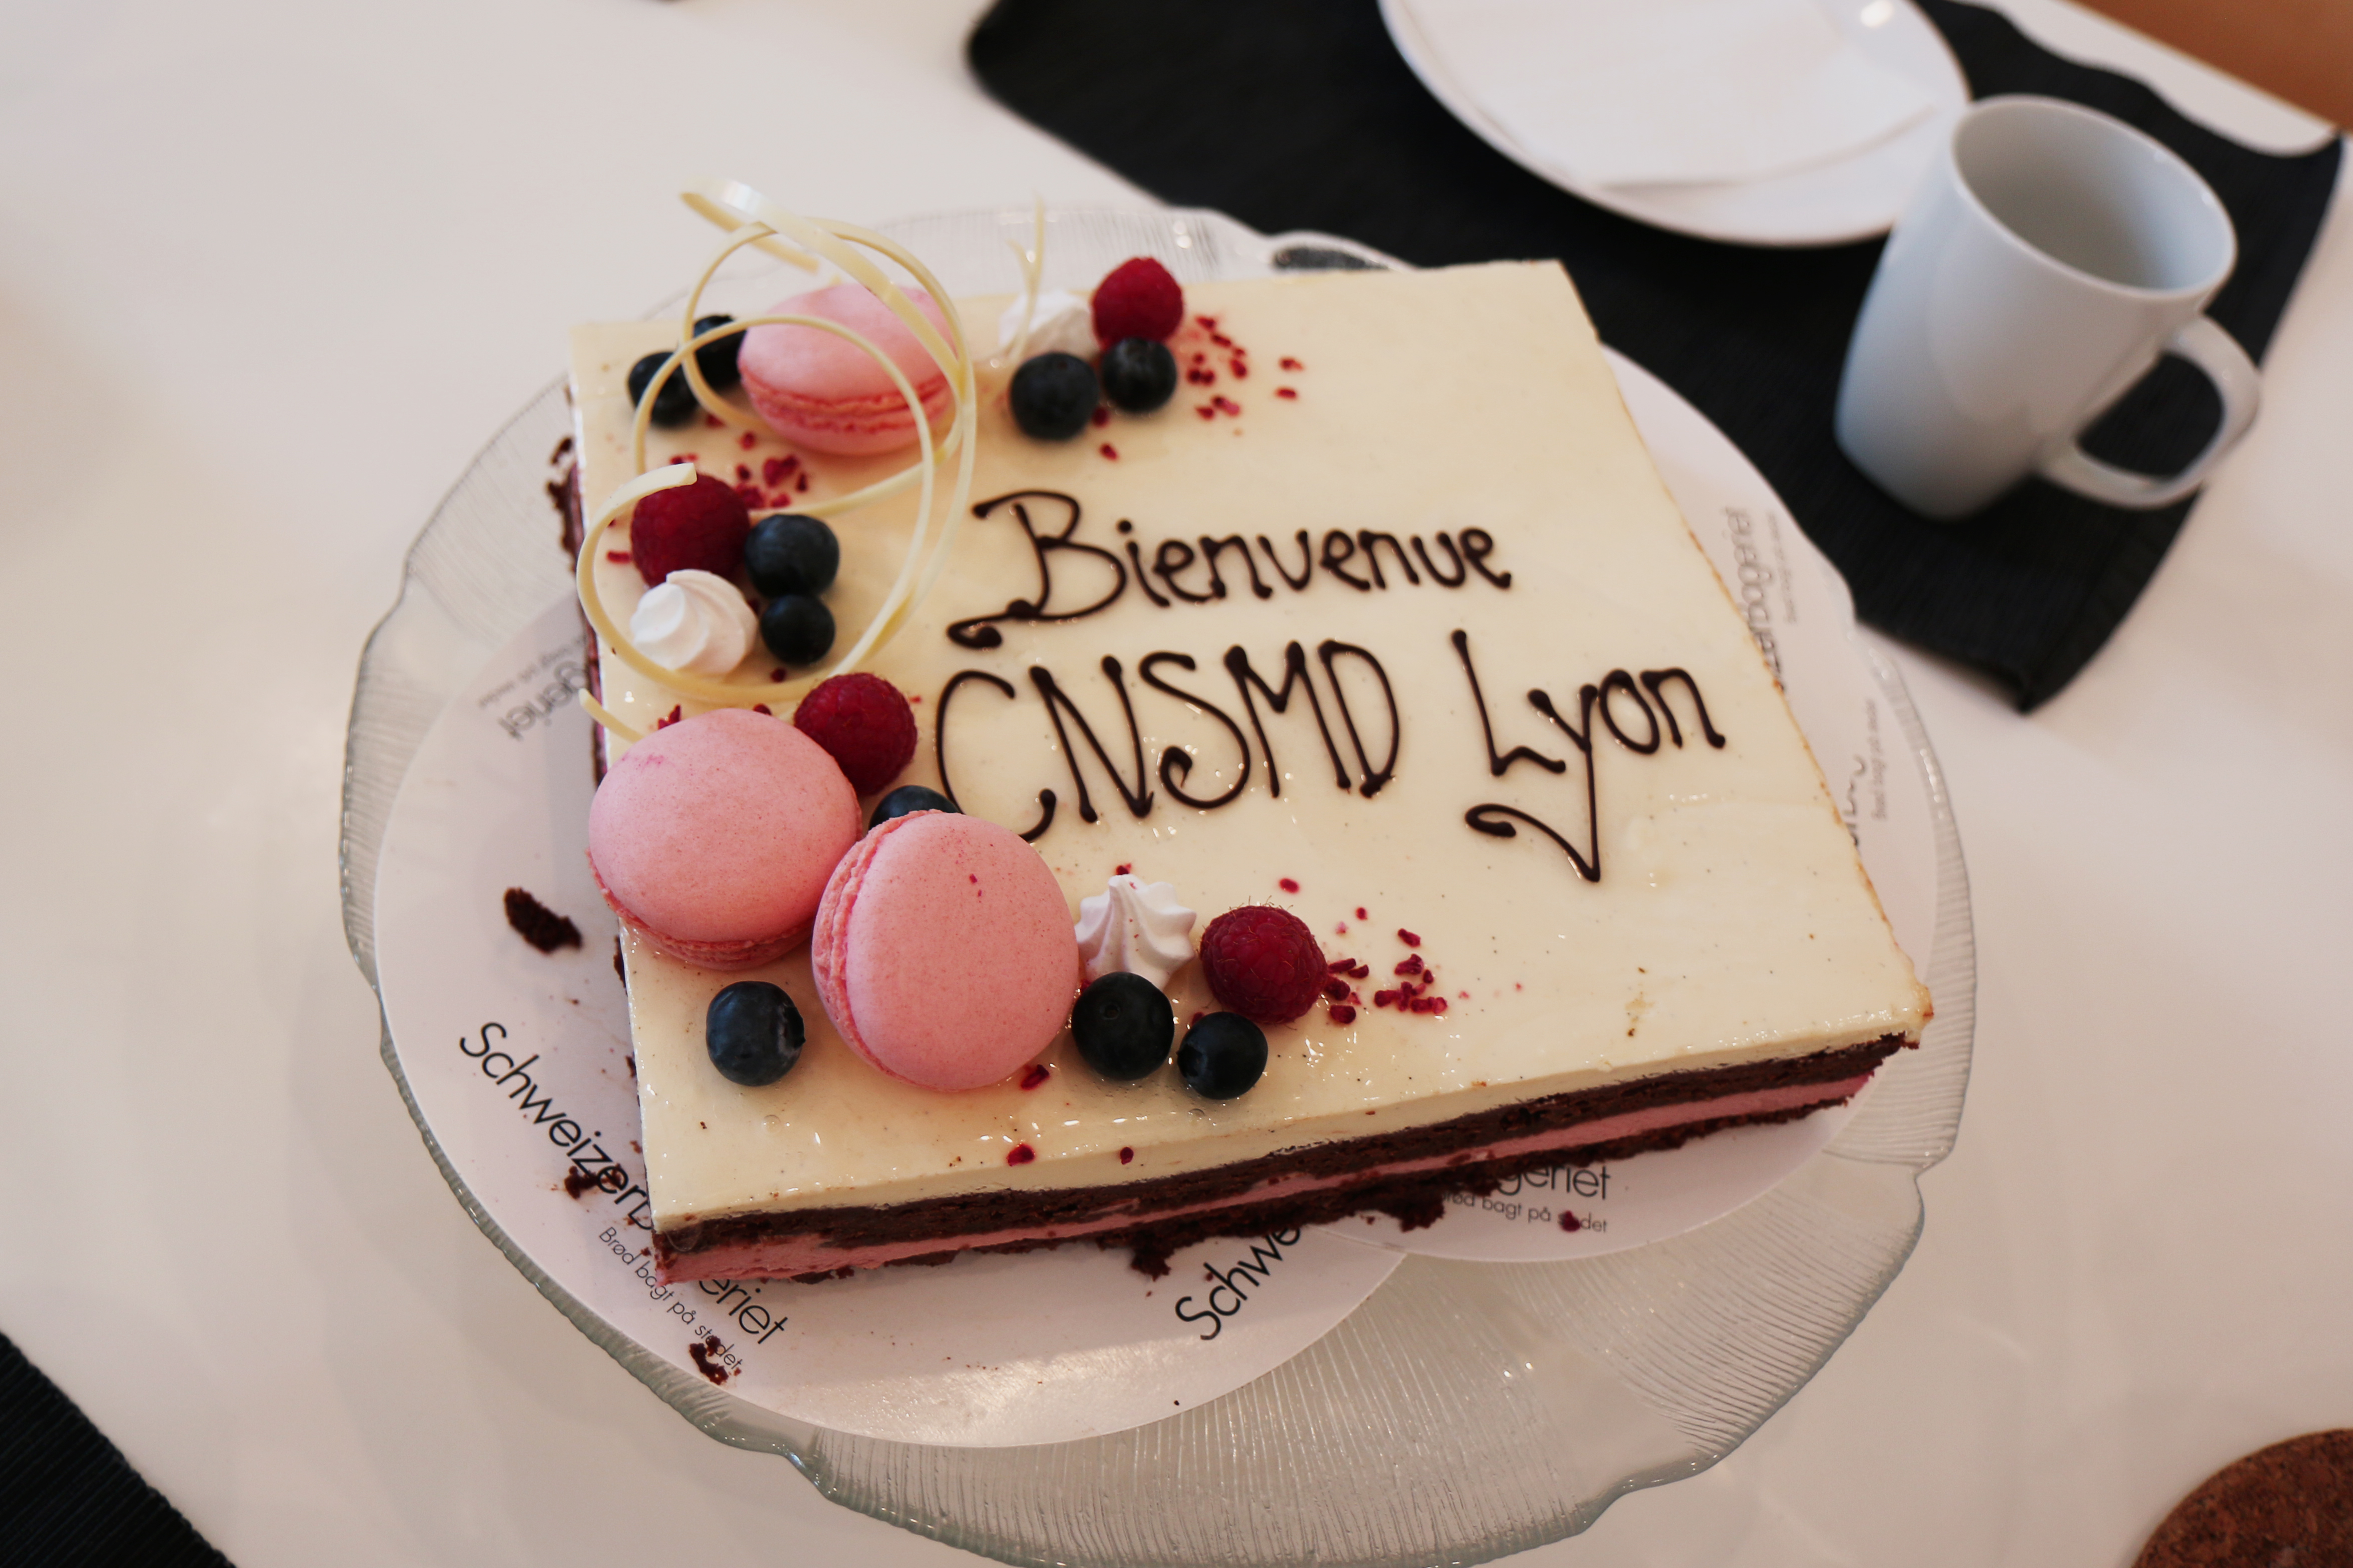 ASIMUT welcome cake for CNSMD Lyon